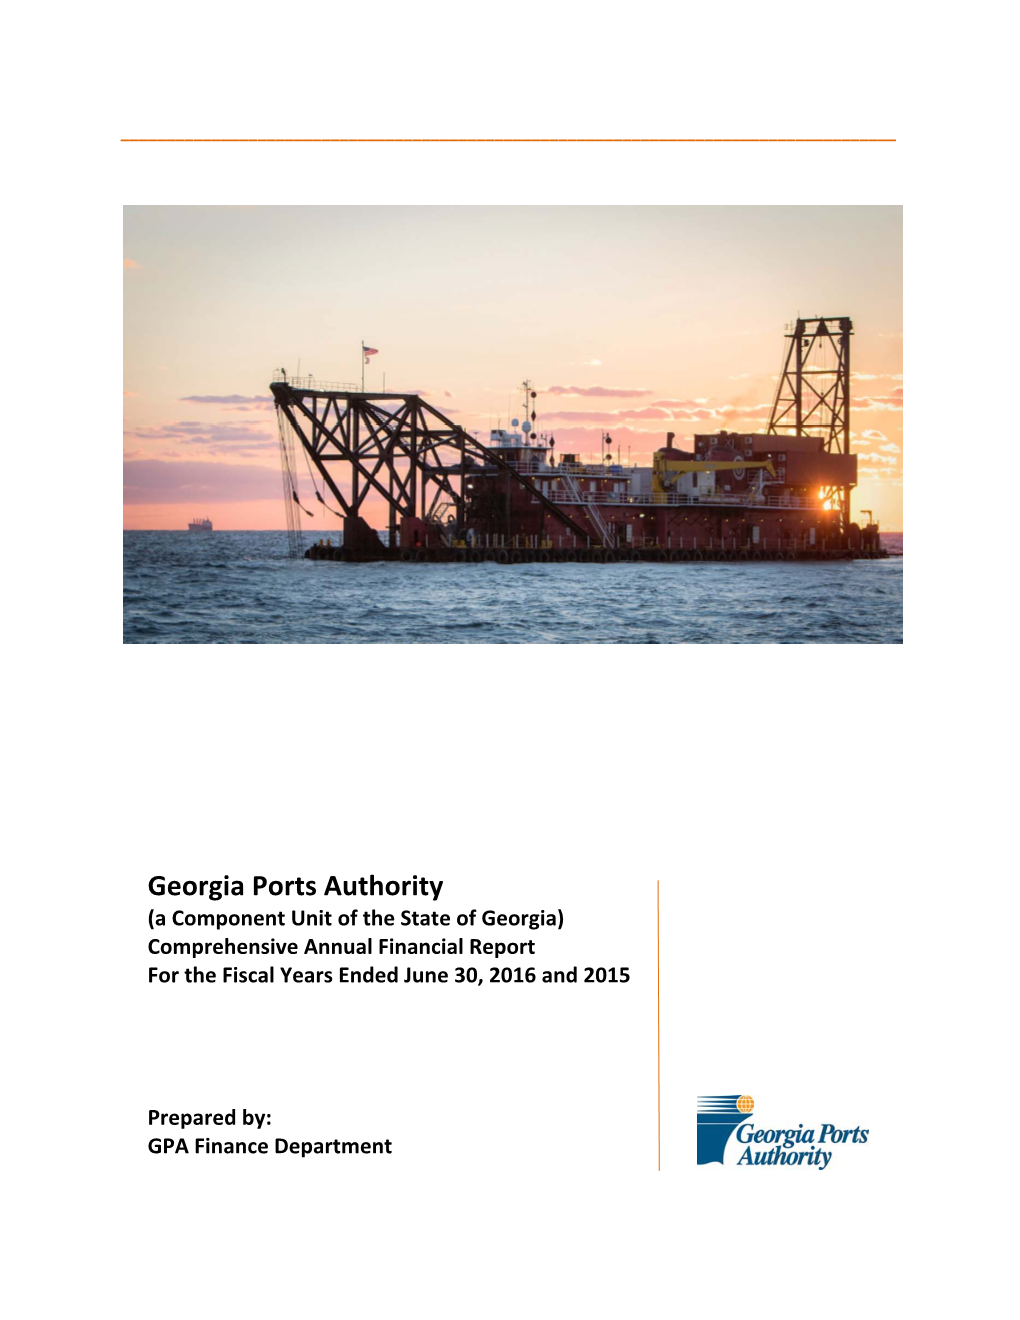 Georgia Ports Authority (A Component Unit of the State of Georgia) Comprehensive Annual Financial Report for the Fiscal Years Ended June 30, 2016 and 2015